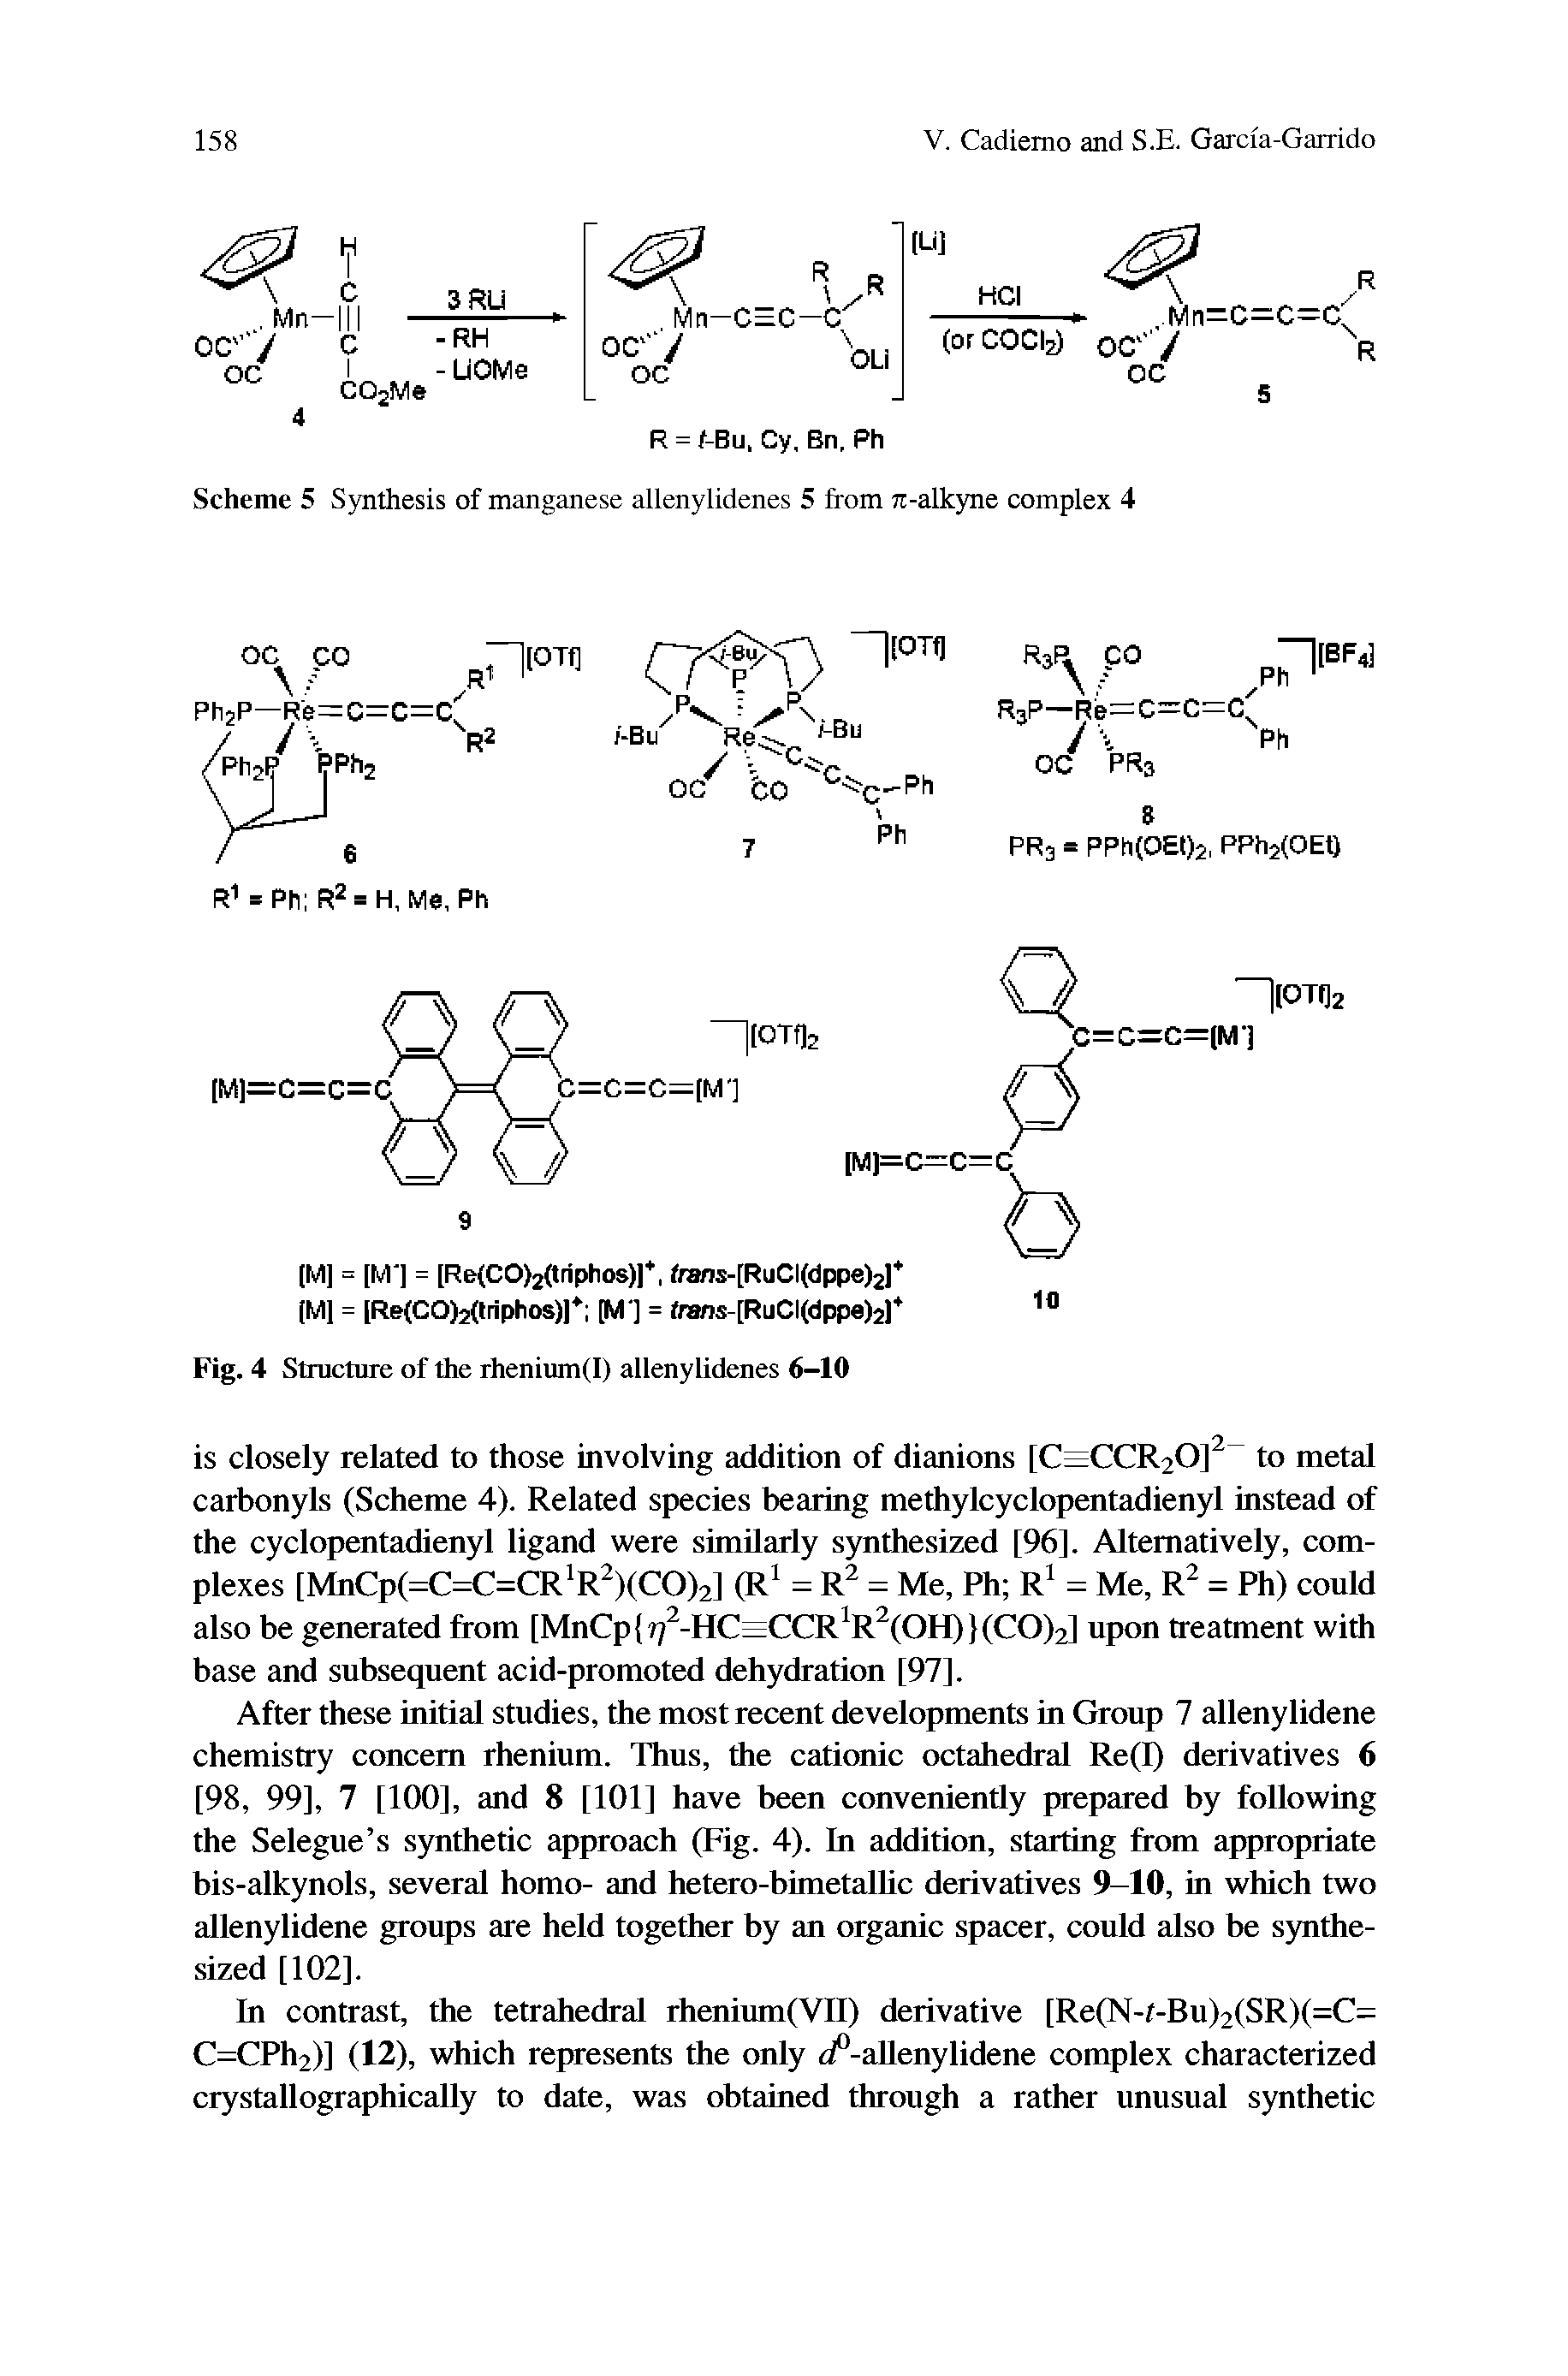 Scheme 5 Synthesis of manganese allenylidenes 5 from 7i-alkyne complex 4...